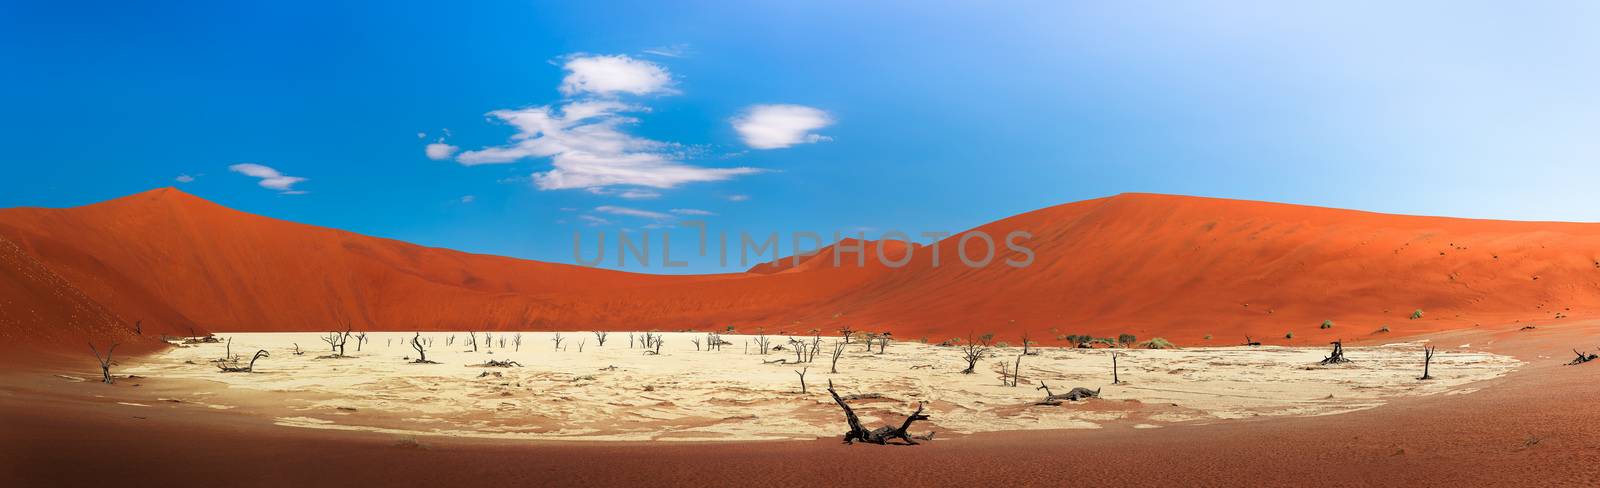 Panorama of red dunes and dead camel thorn trees in Deadvlei, Namibia by nickfox